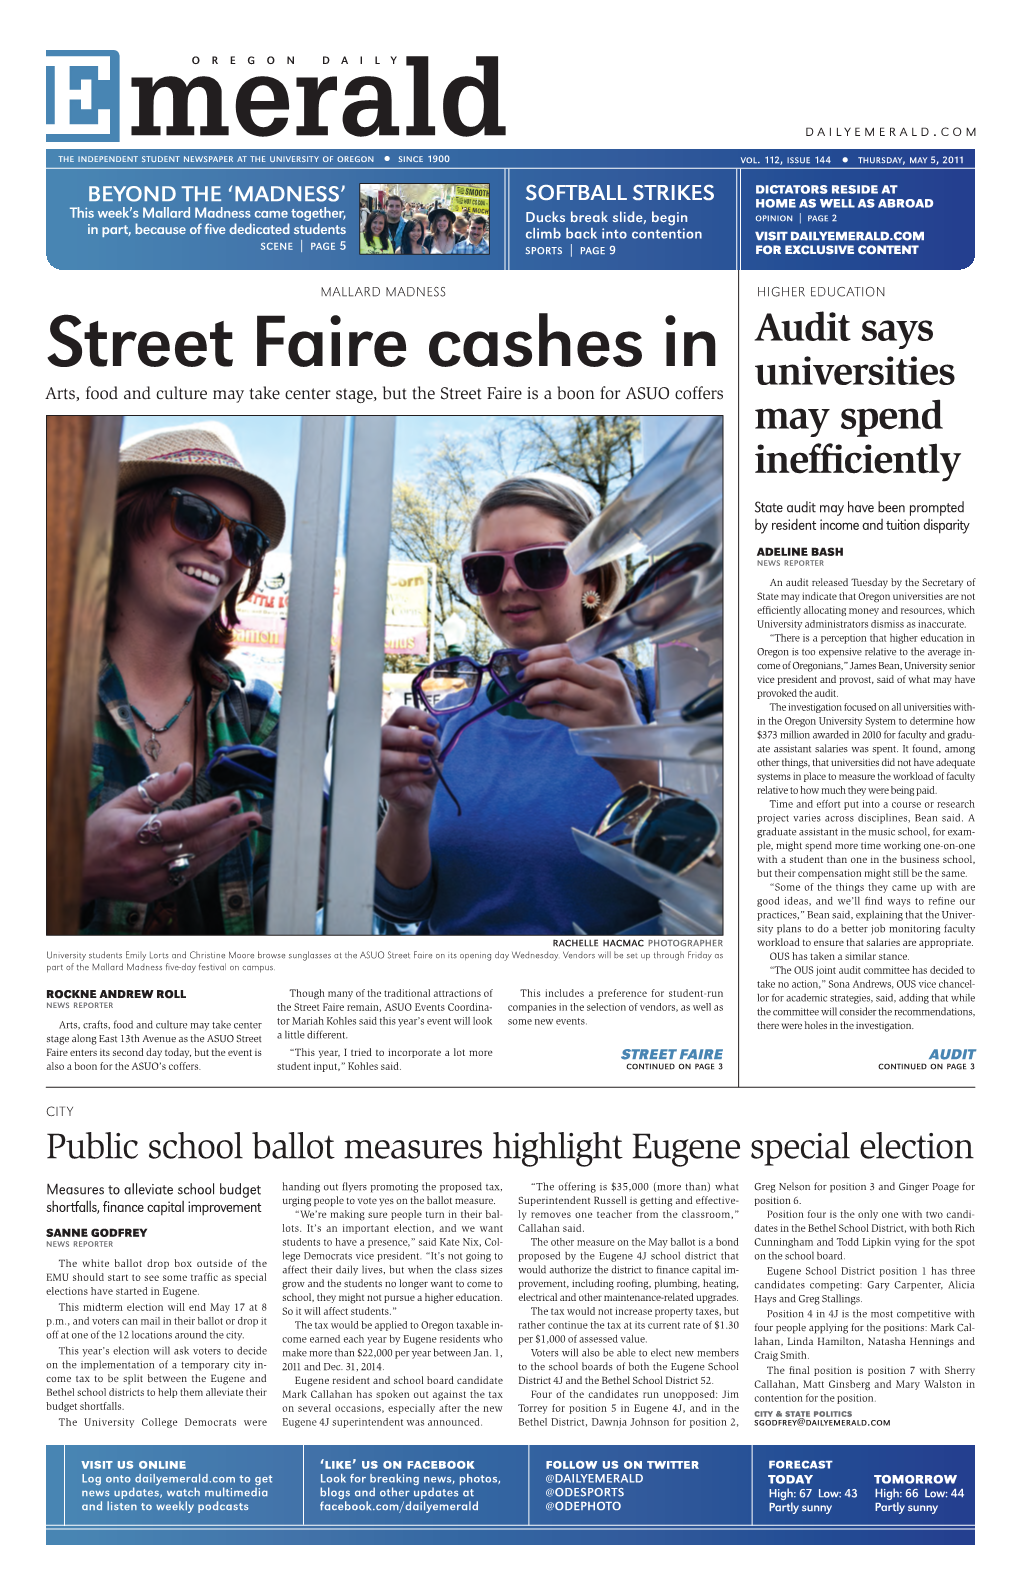 Street Faire Cashes in Universities Arts, Food and Culture May Take Center Stage, but the Street Faire Is a Boon for ASUO Coffers May Spend Inefficiently